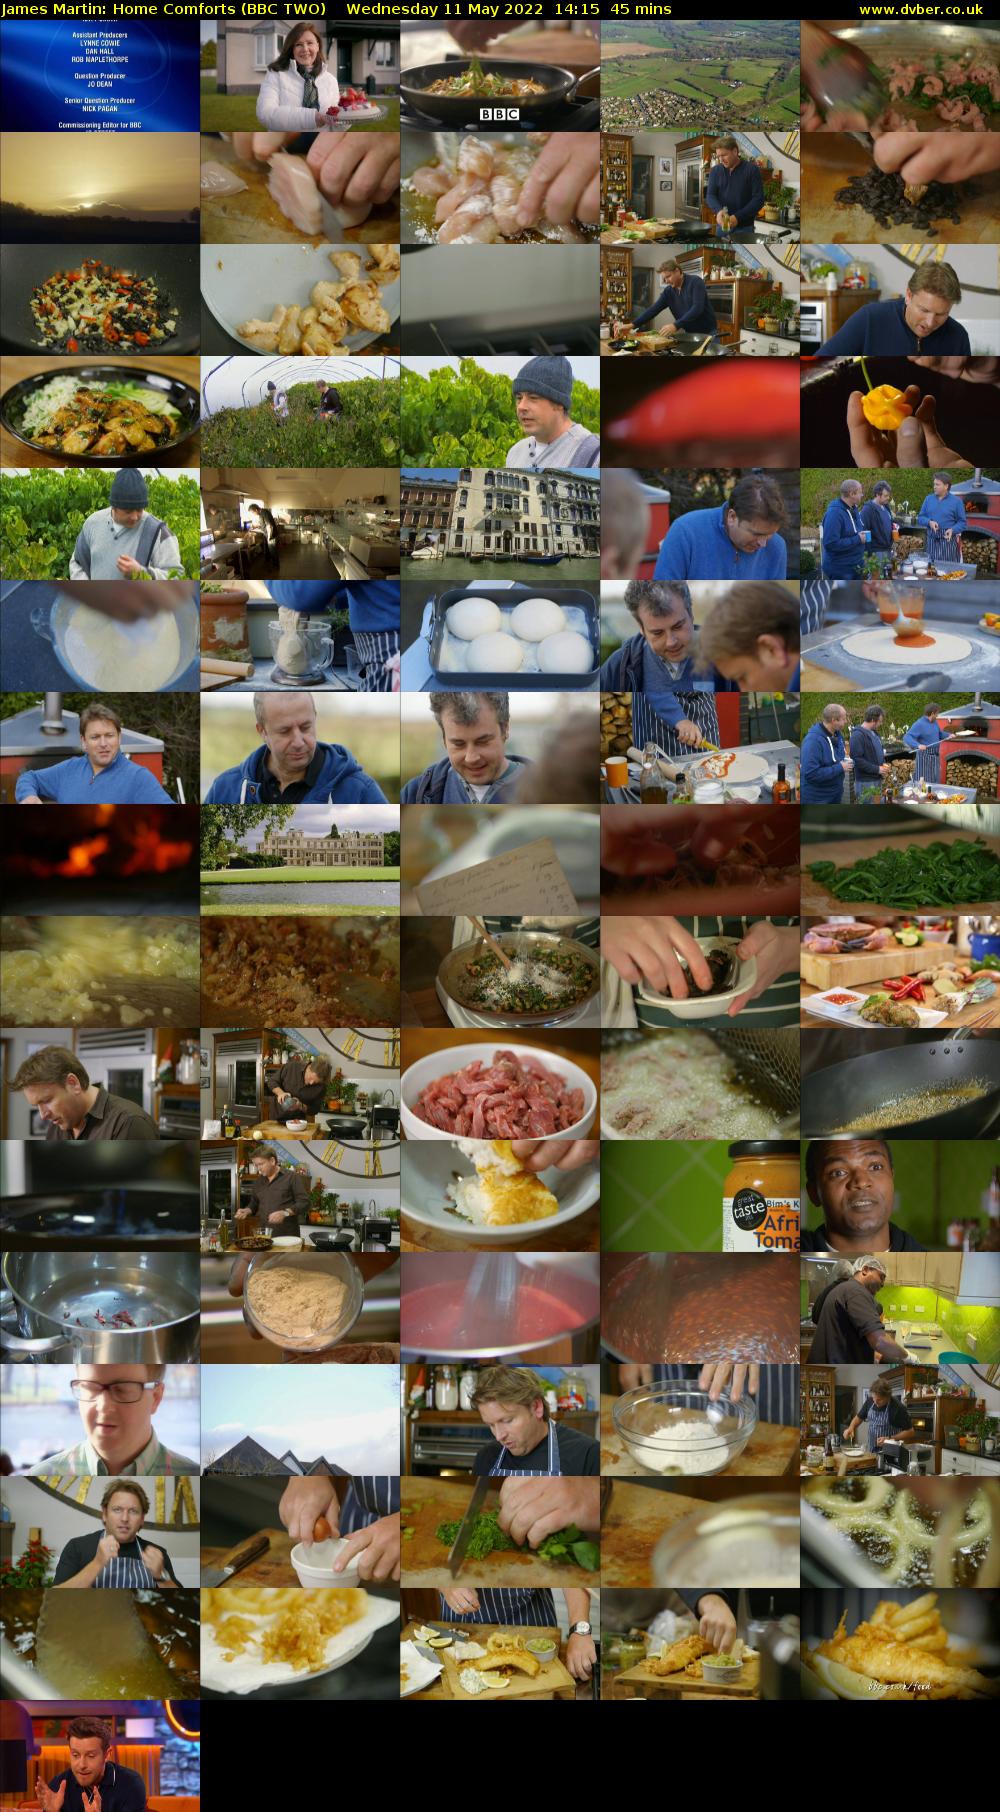 James Martin: Home Comforts (BBC TWO) Wednesday 11 May 2022 14:15 - 15:00